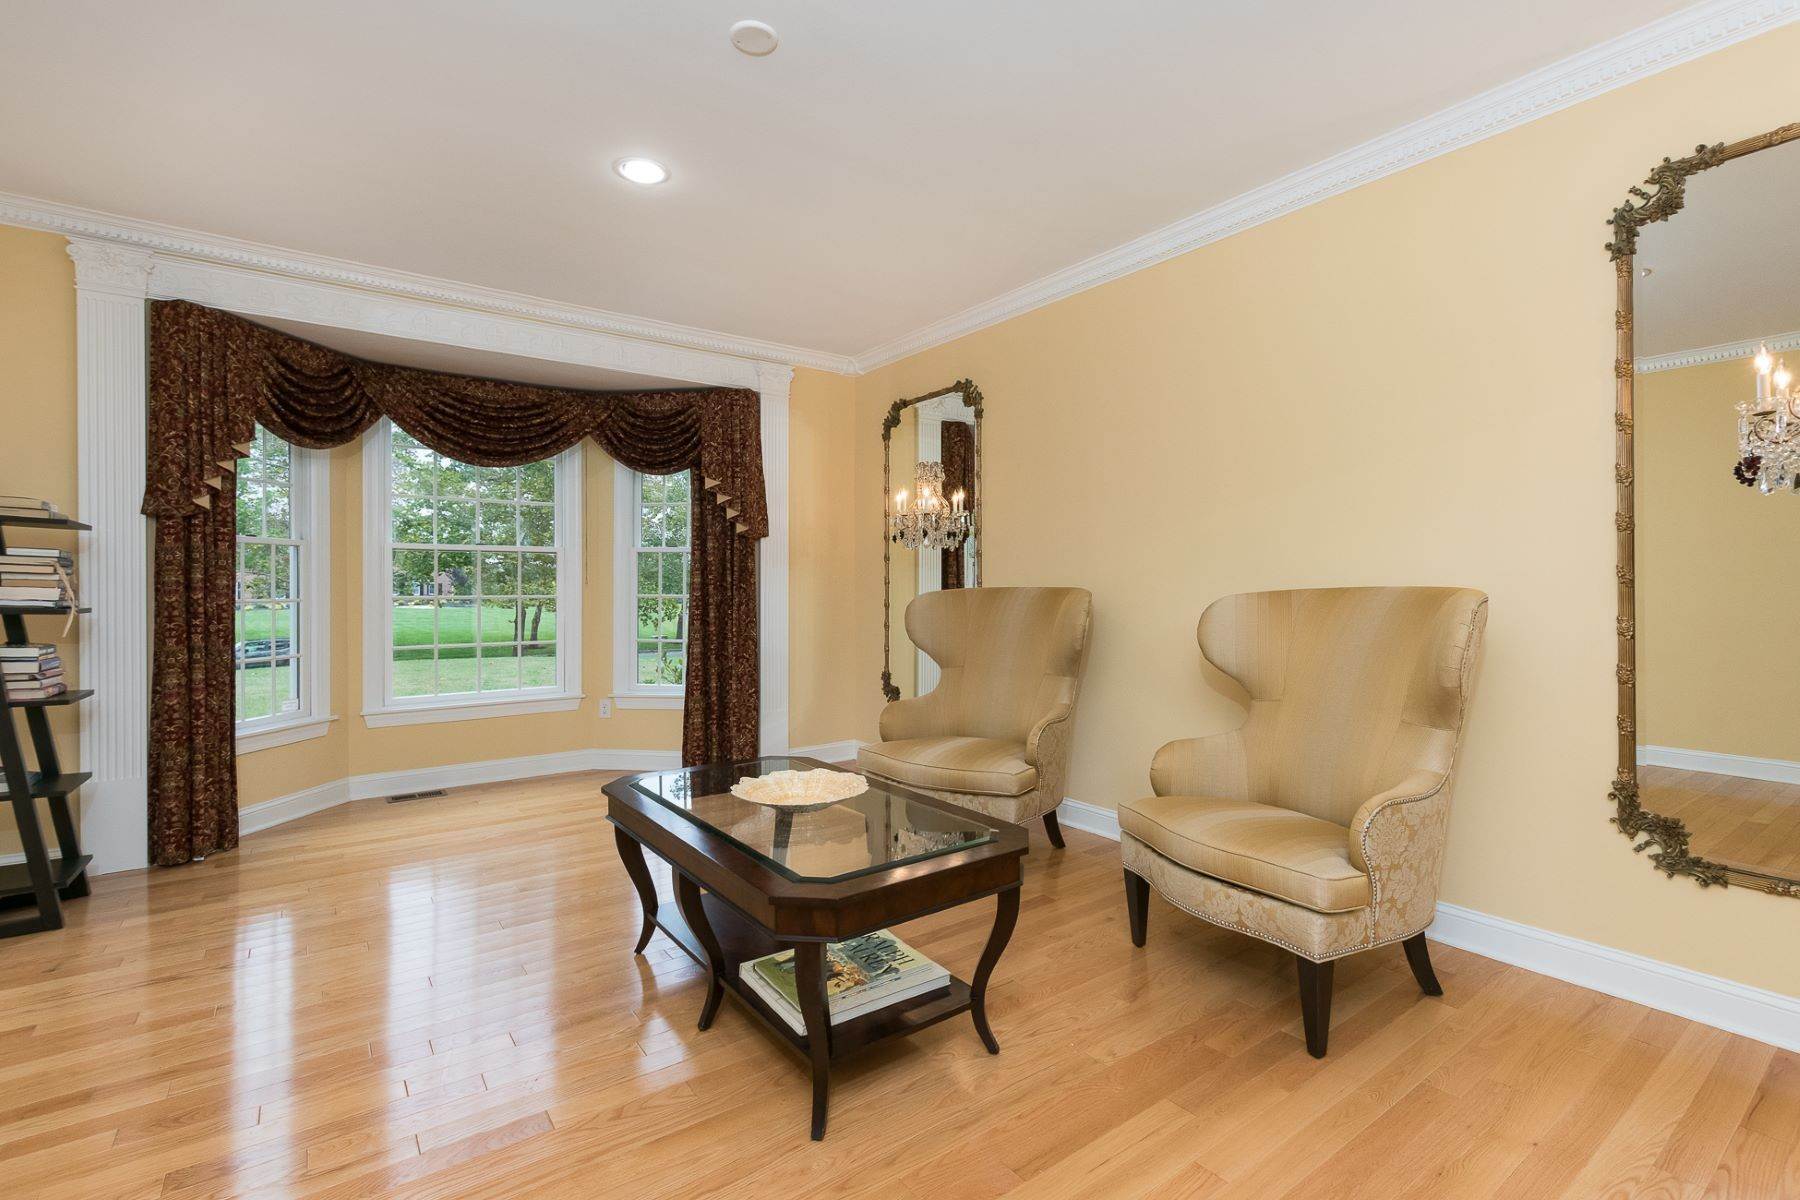 4. Single Family Homes for Sale at Lavish Decor, Indulgent Baths and Party-Ready Pool 305 Cobblestone Way, Lawrence Township, New Jersey 08648 United States